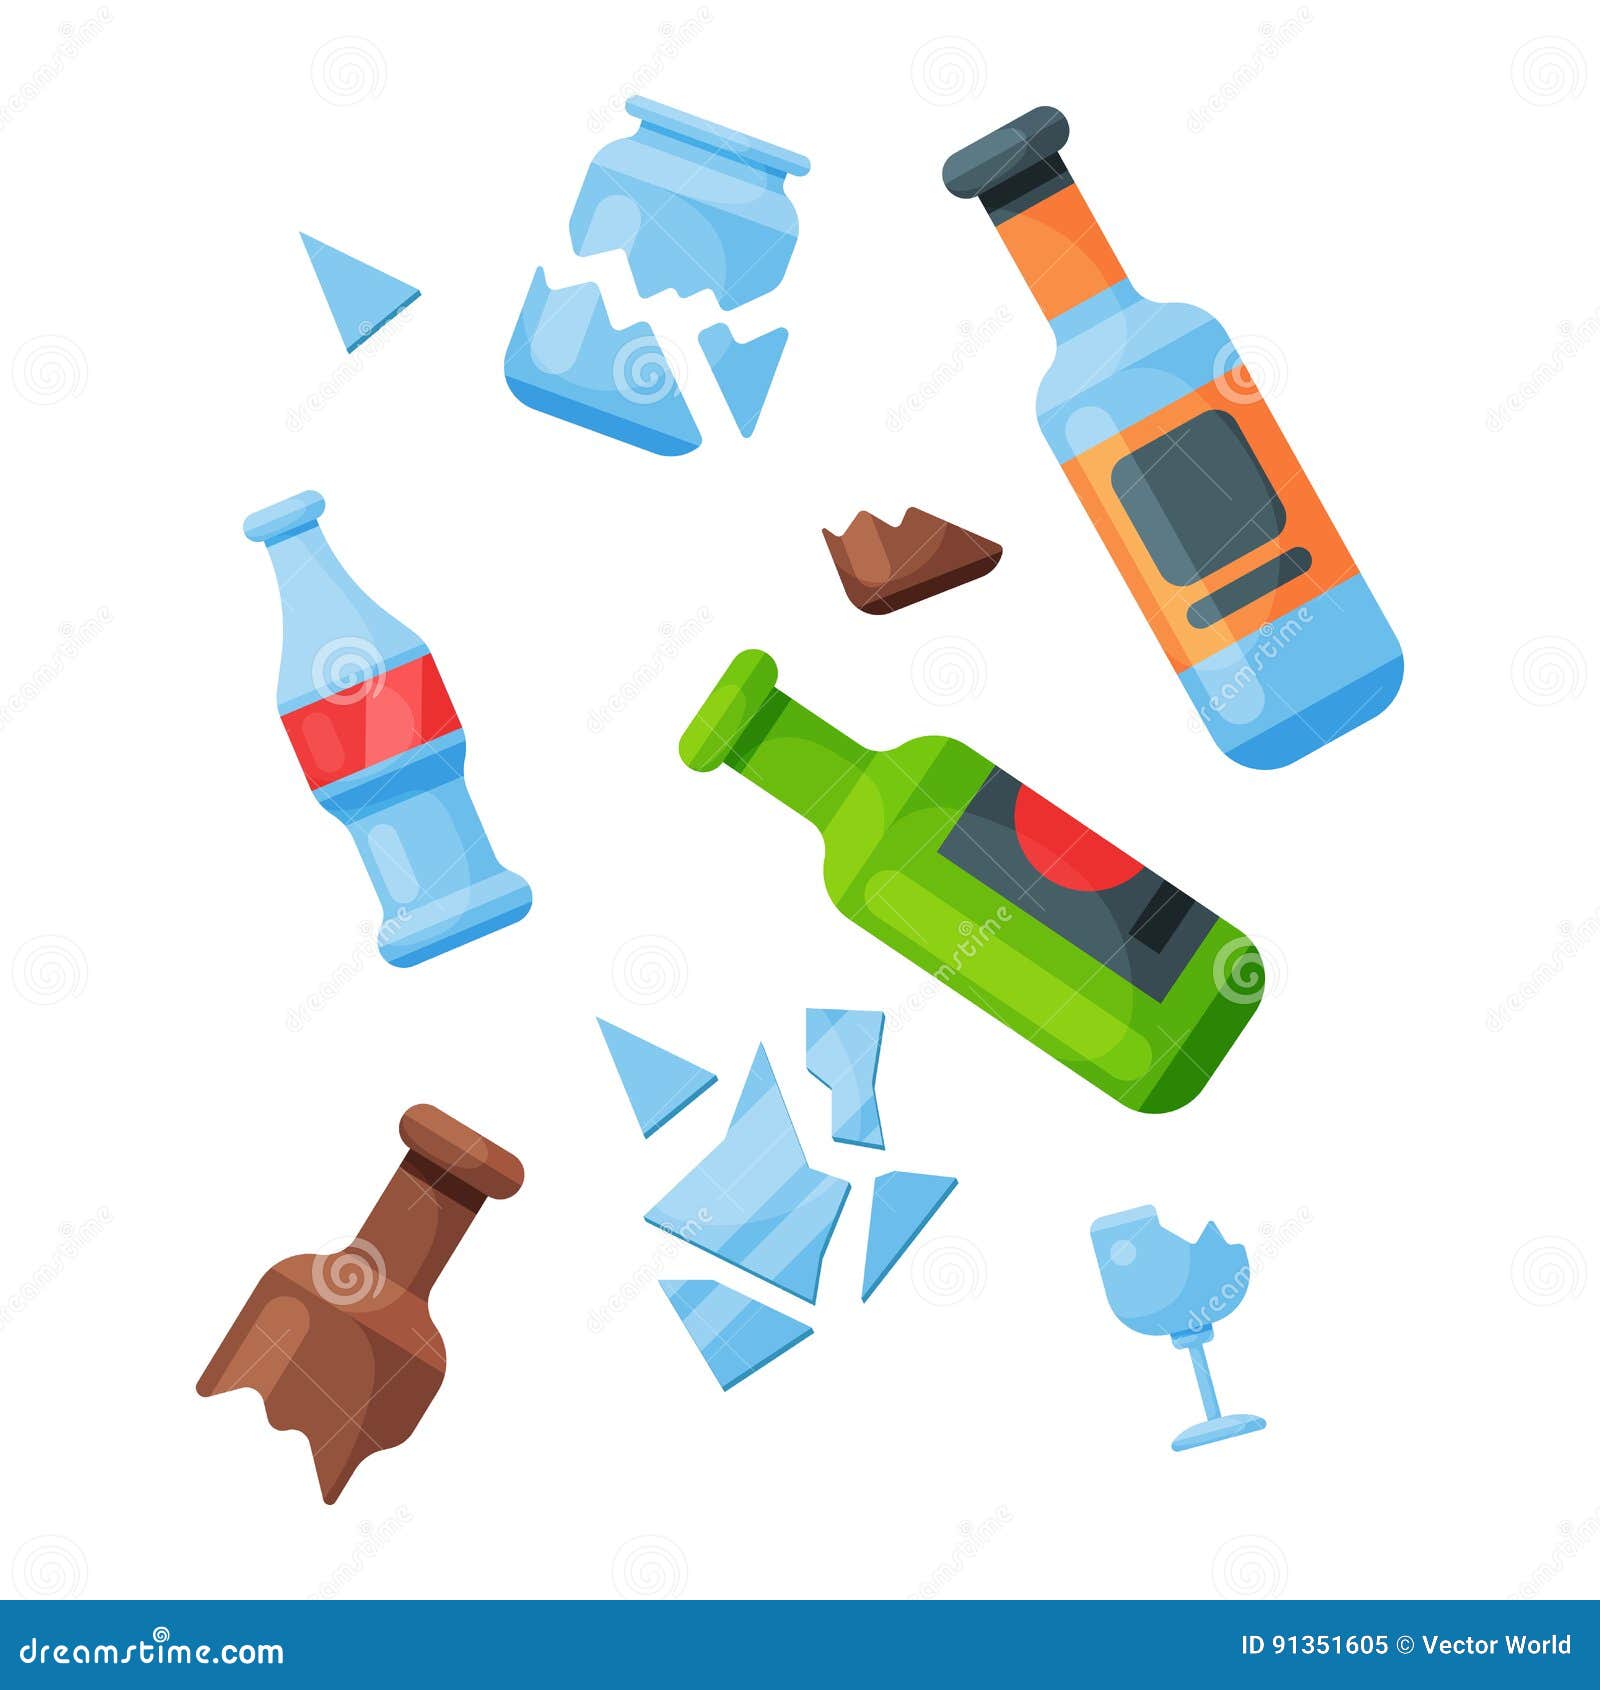 https://thumbs.dreamstime.com/z/recycling-garbage-glass-trash-bag-tires-management-industry-utilize-waste-can-vector-illustration-elements-concept-ecology-91351605.jpg